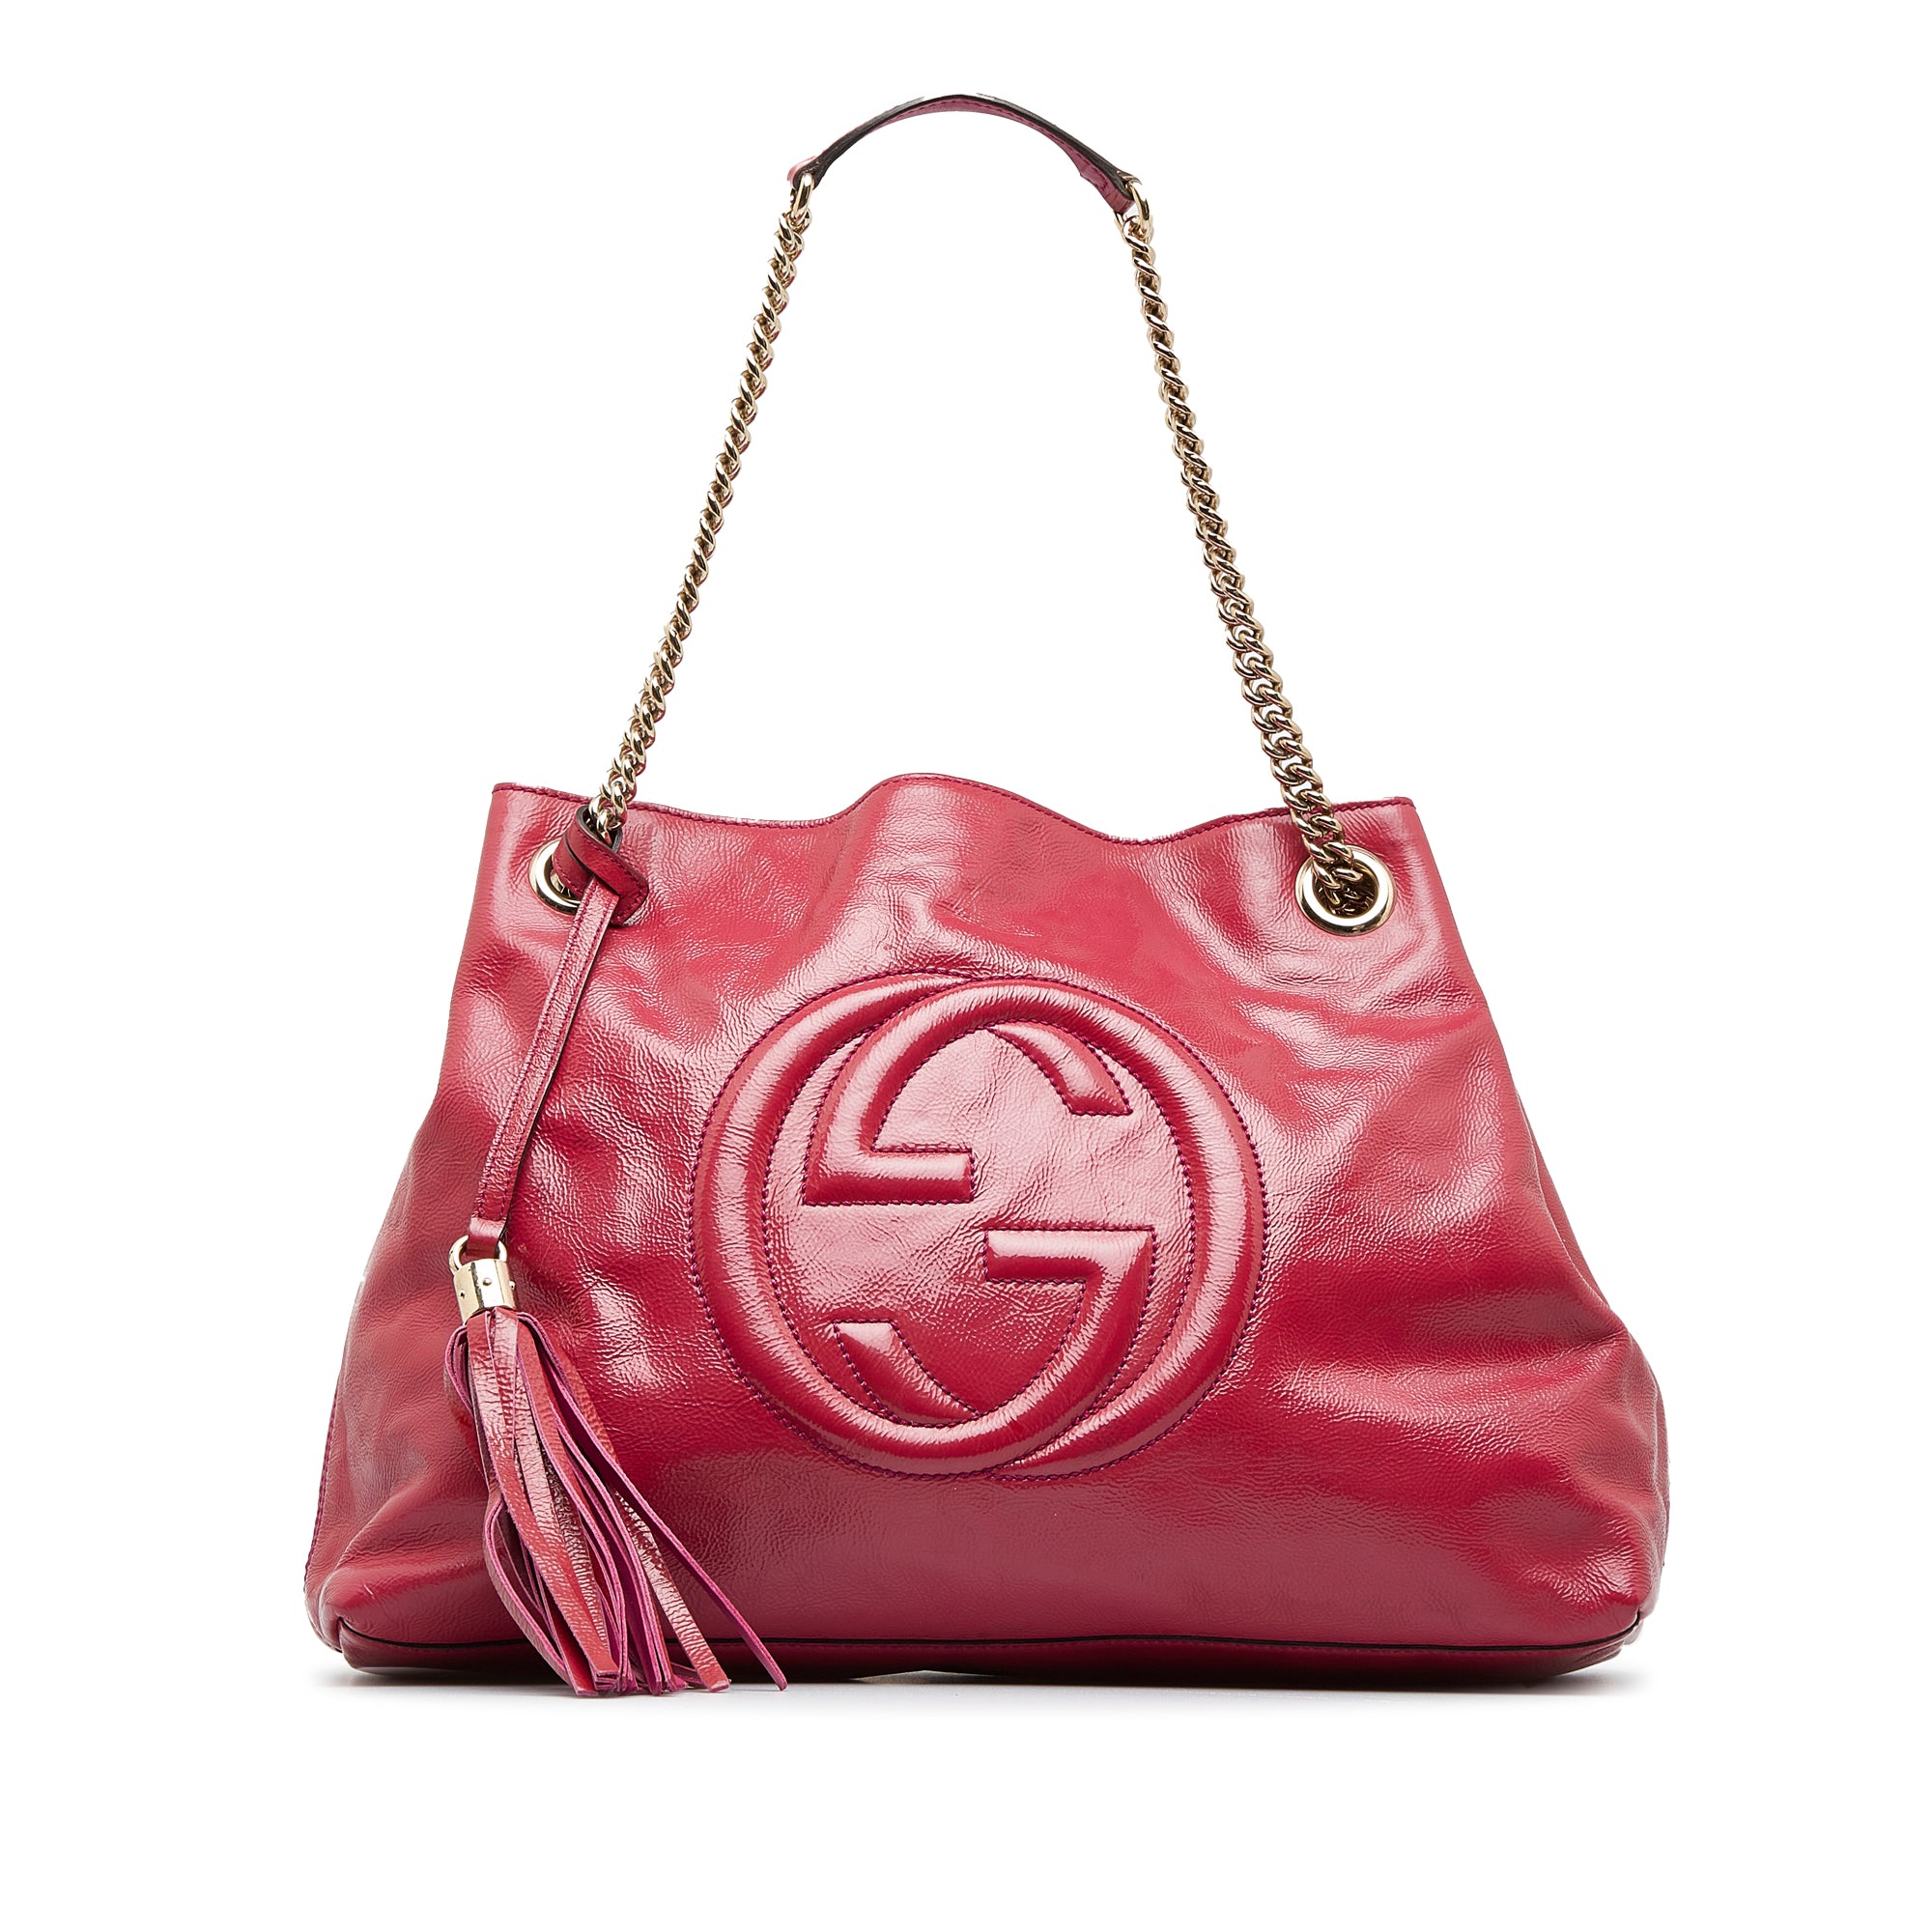 Gucci, Bags, Gucci Handbag Red With Gold Chains